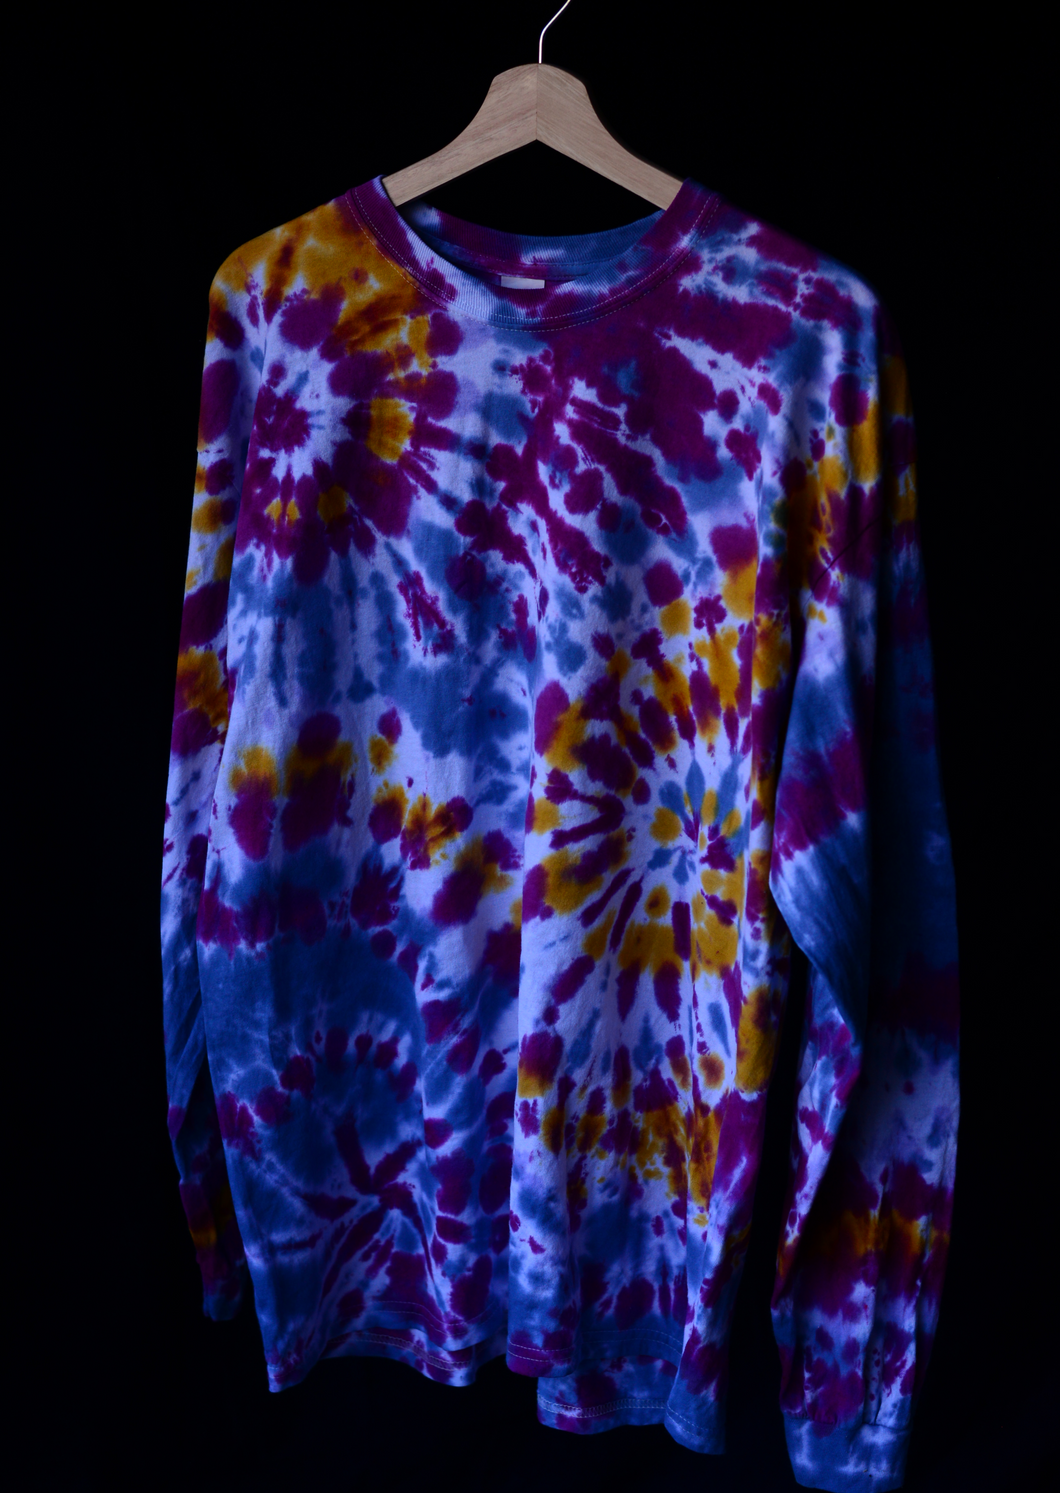 Tie dye shirt with multiple spirals. Colors are deep purple and yellow with a lighter blue.